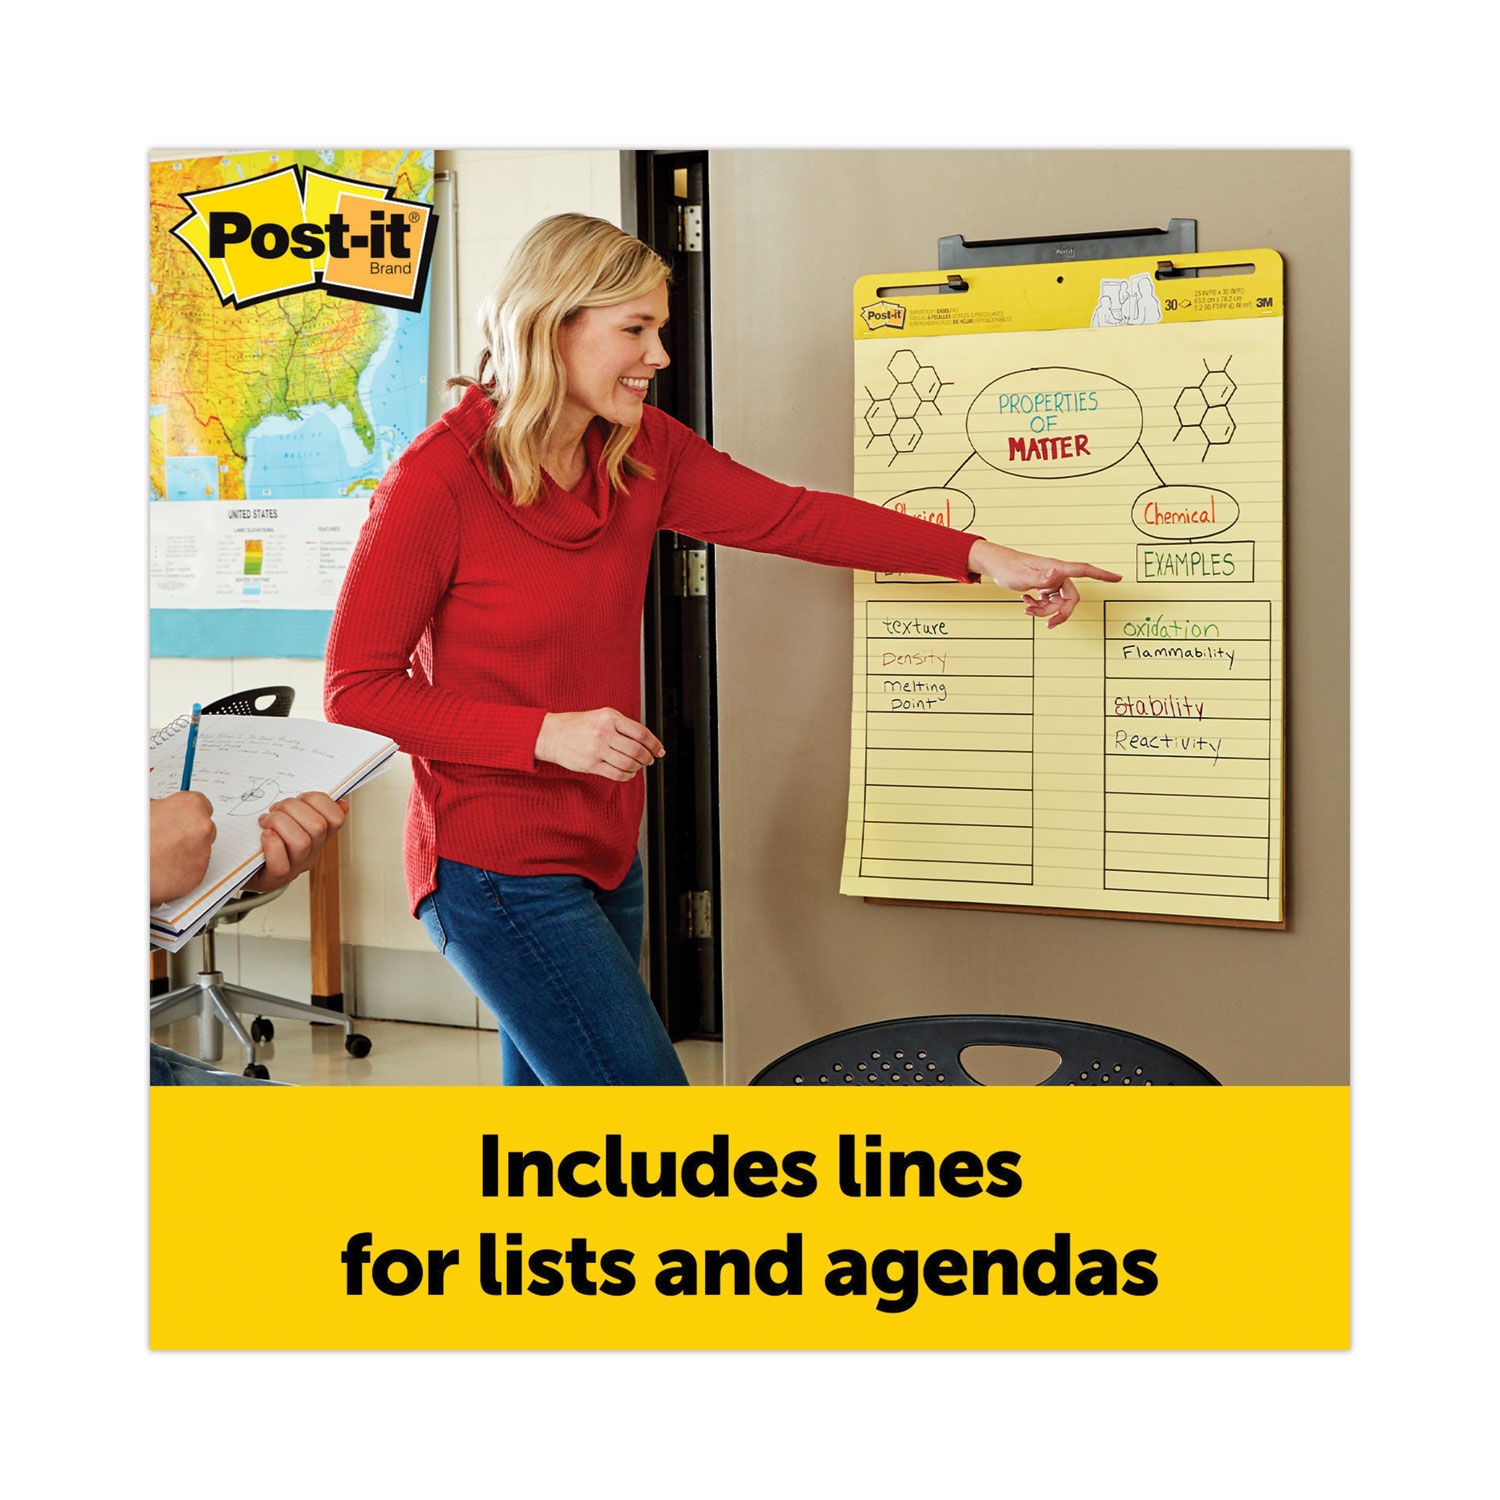  Post-it Super Sticky Easel Pad, 25 in x 30 in Sheets, Yellow  Paper with Lines, 30 Sheets/Pad, 4 Pads/Pack, Great for Virtual Teachers  and Students (561 VAD 4PK) : Sticky